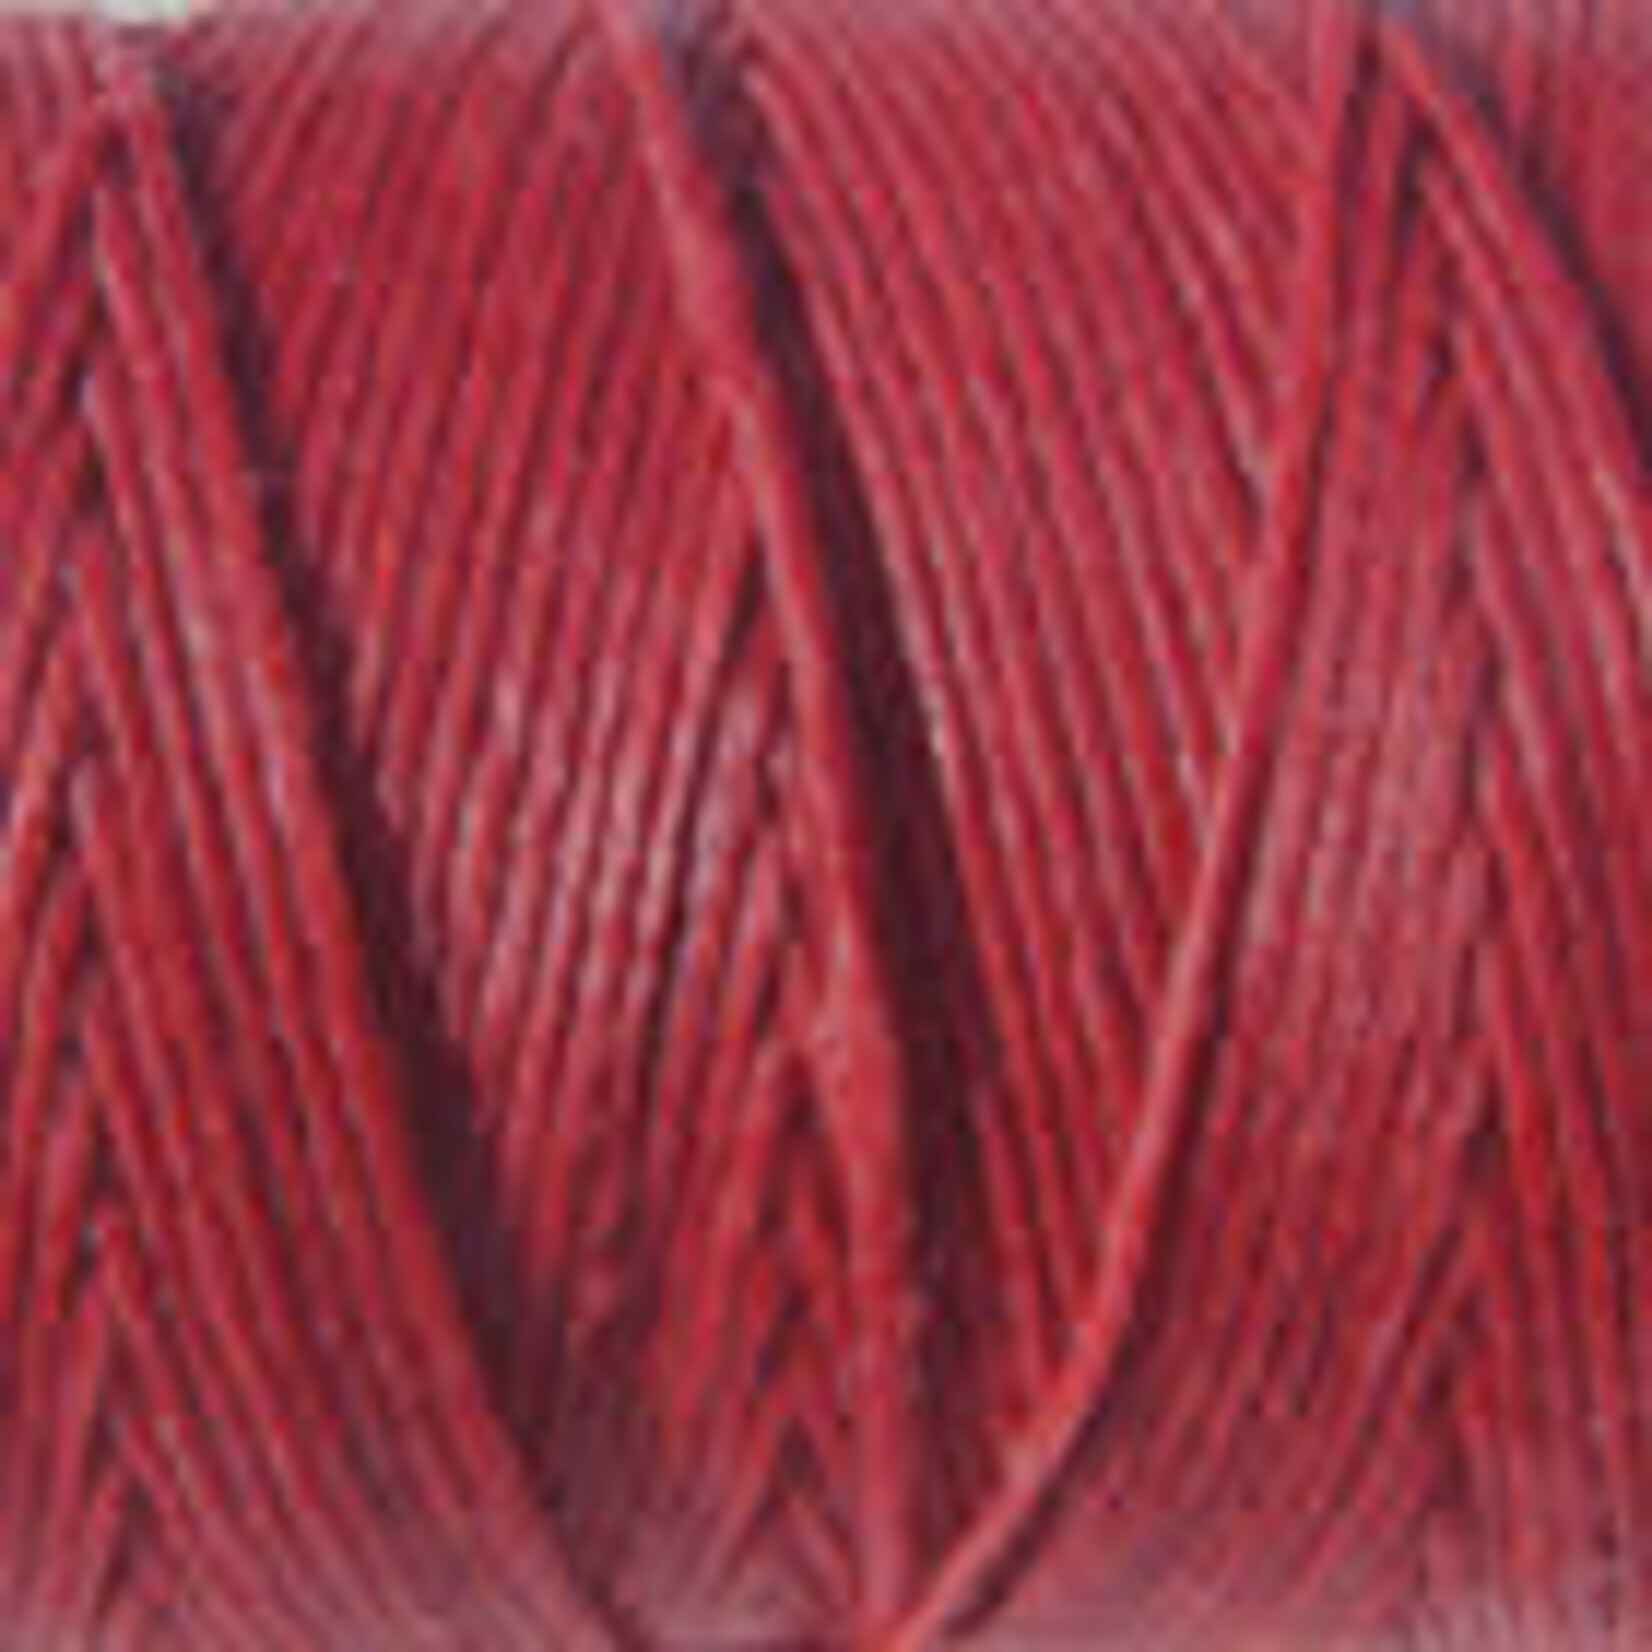 Crawford Waxed Linen Thread Country Red 2Ply/50 Gram X 190Yard